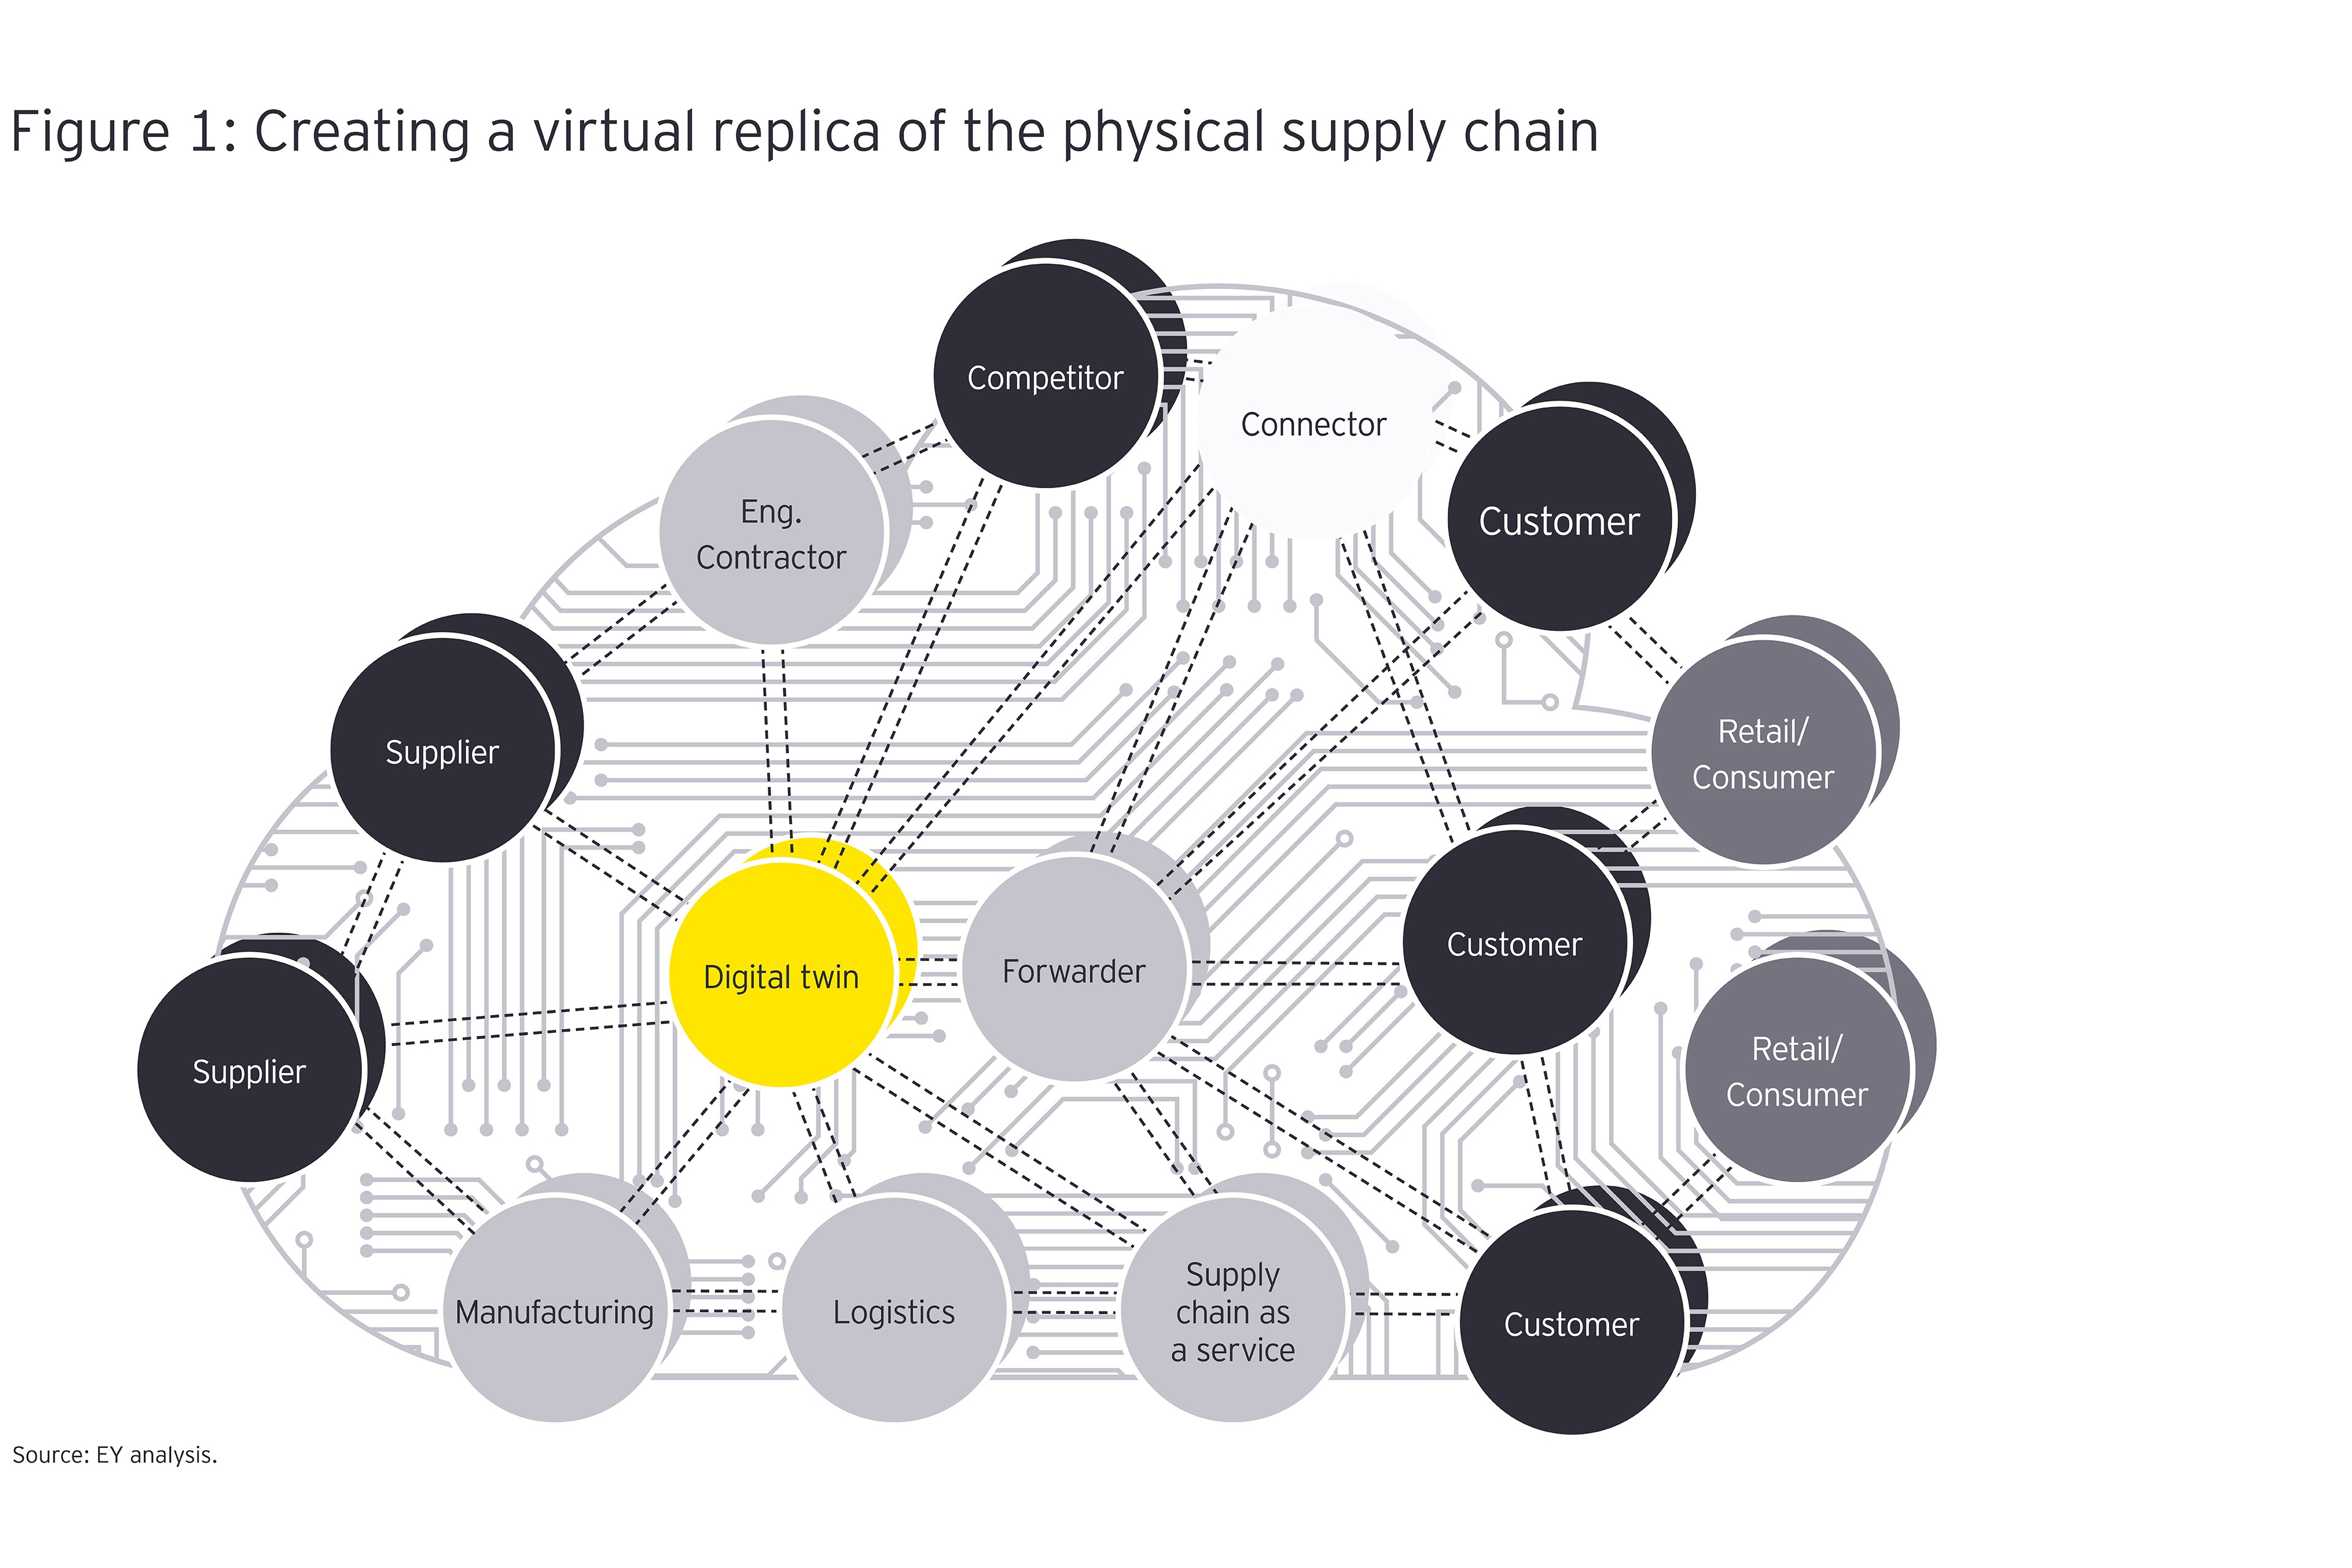 Creating a virtual replica of the physical supply chain